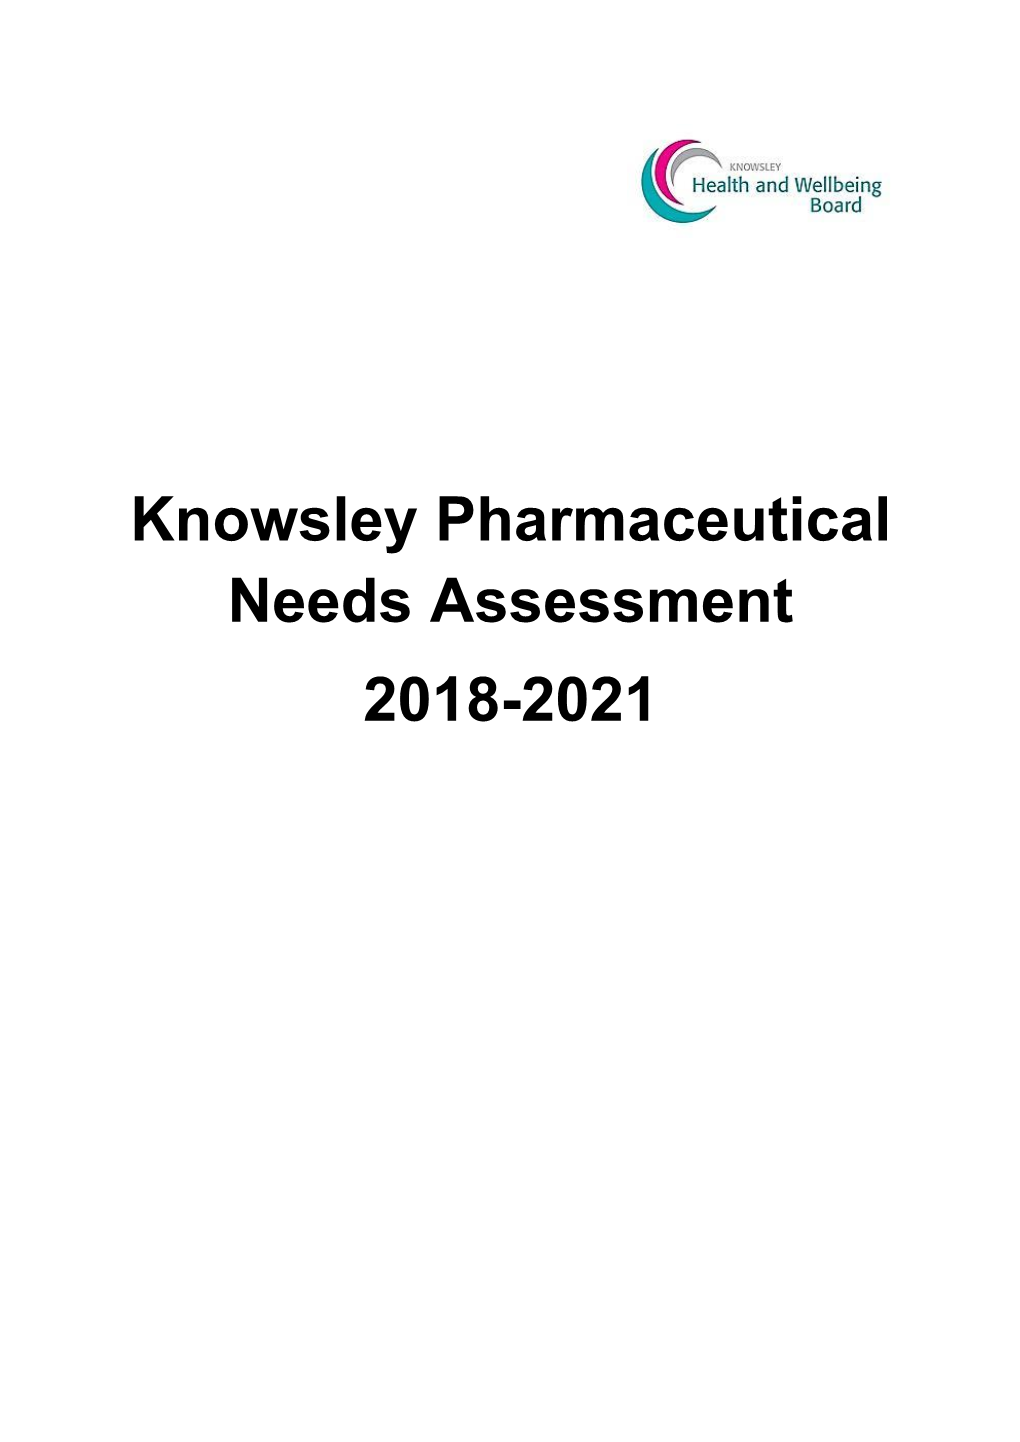 Knowsley Pharmaceutical Needs Assessment 2018-21